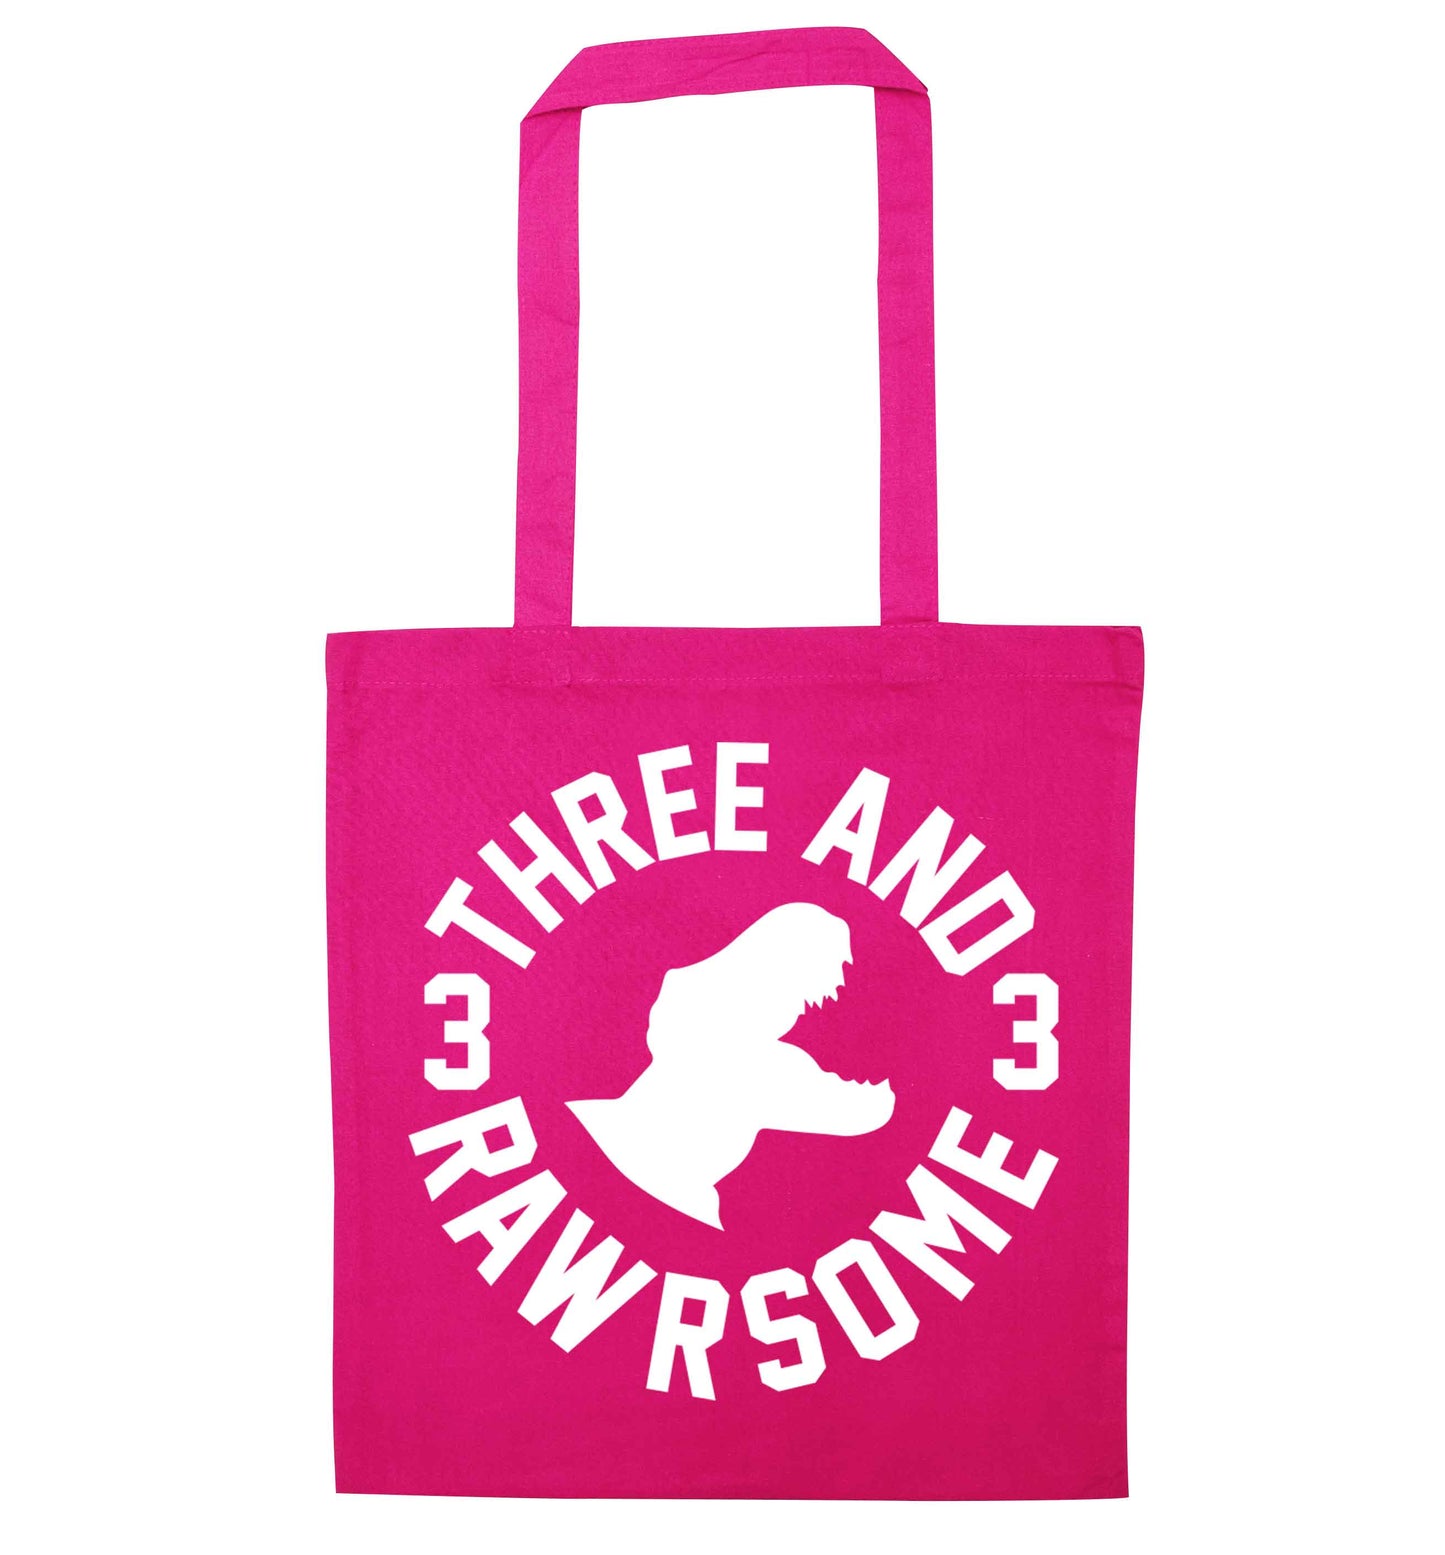 Three and rawrsome pink tote bag